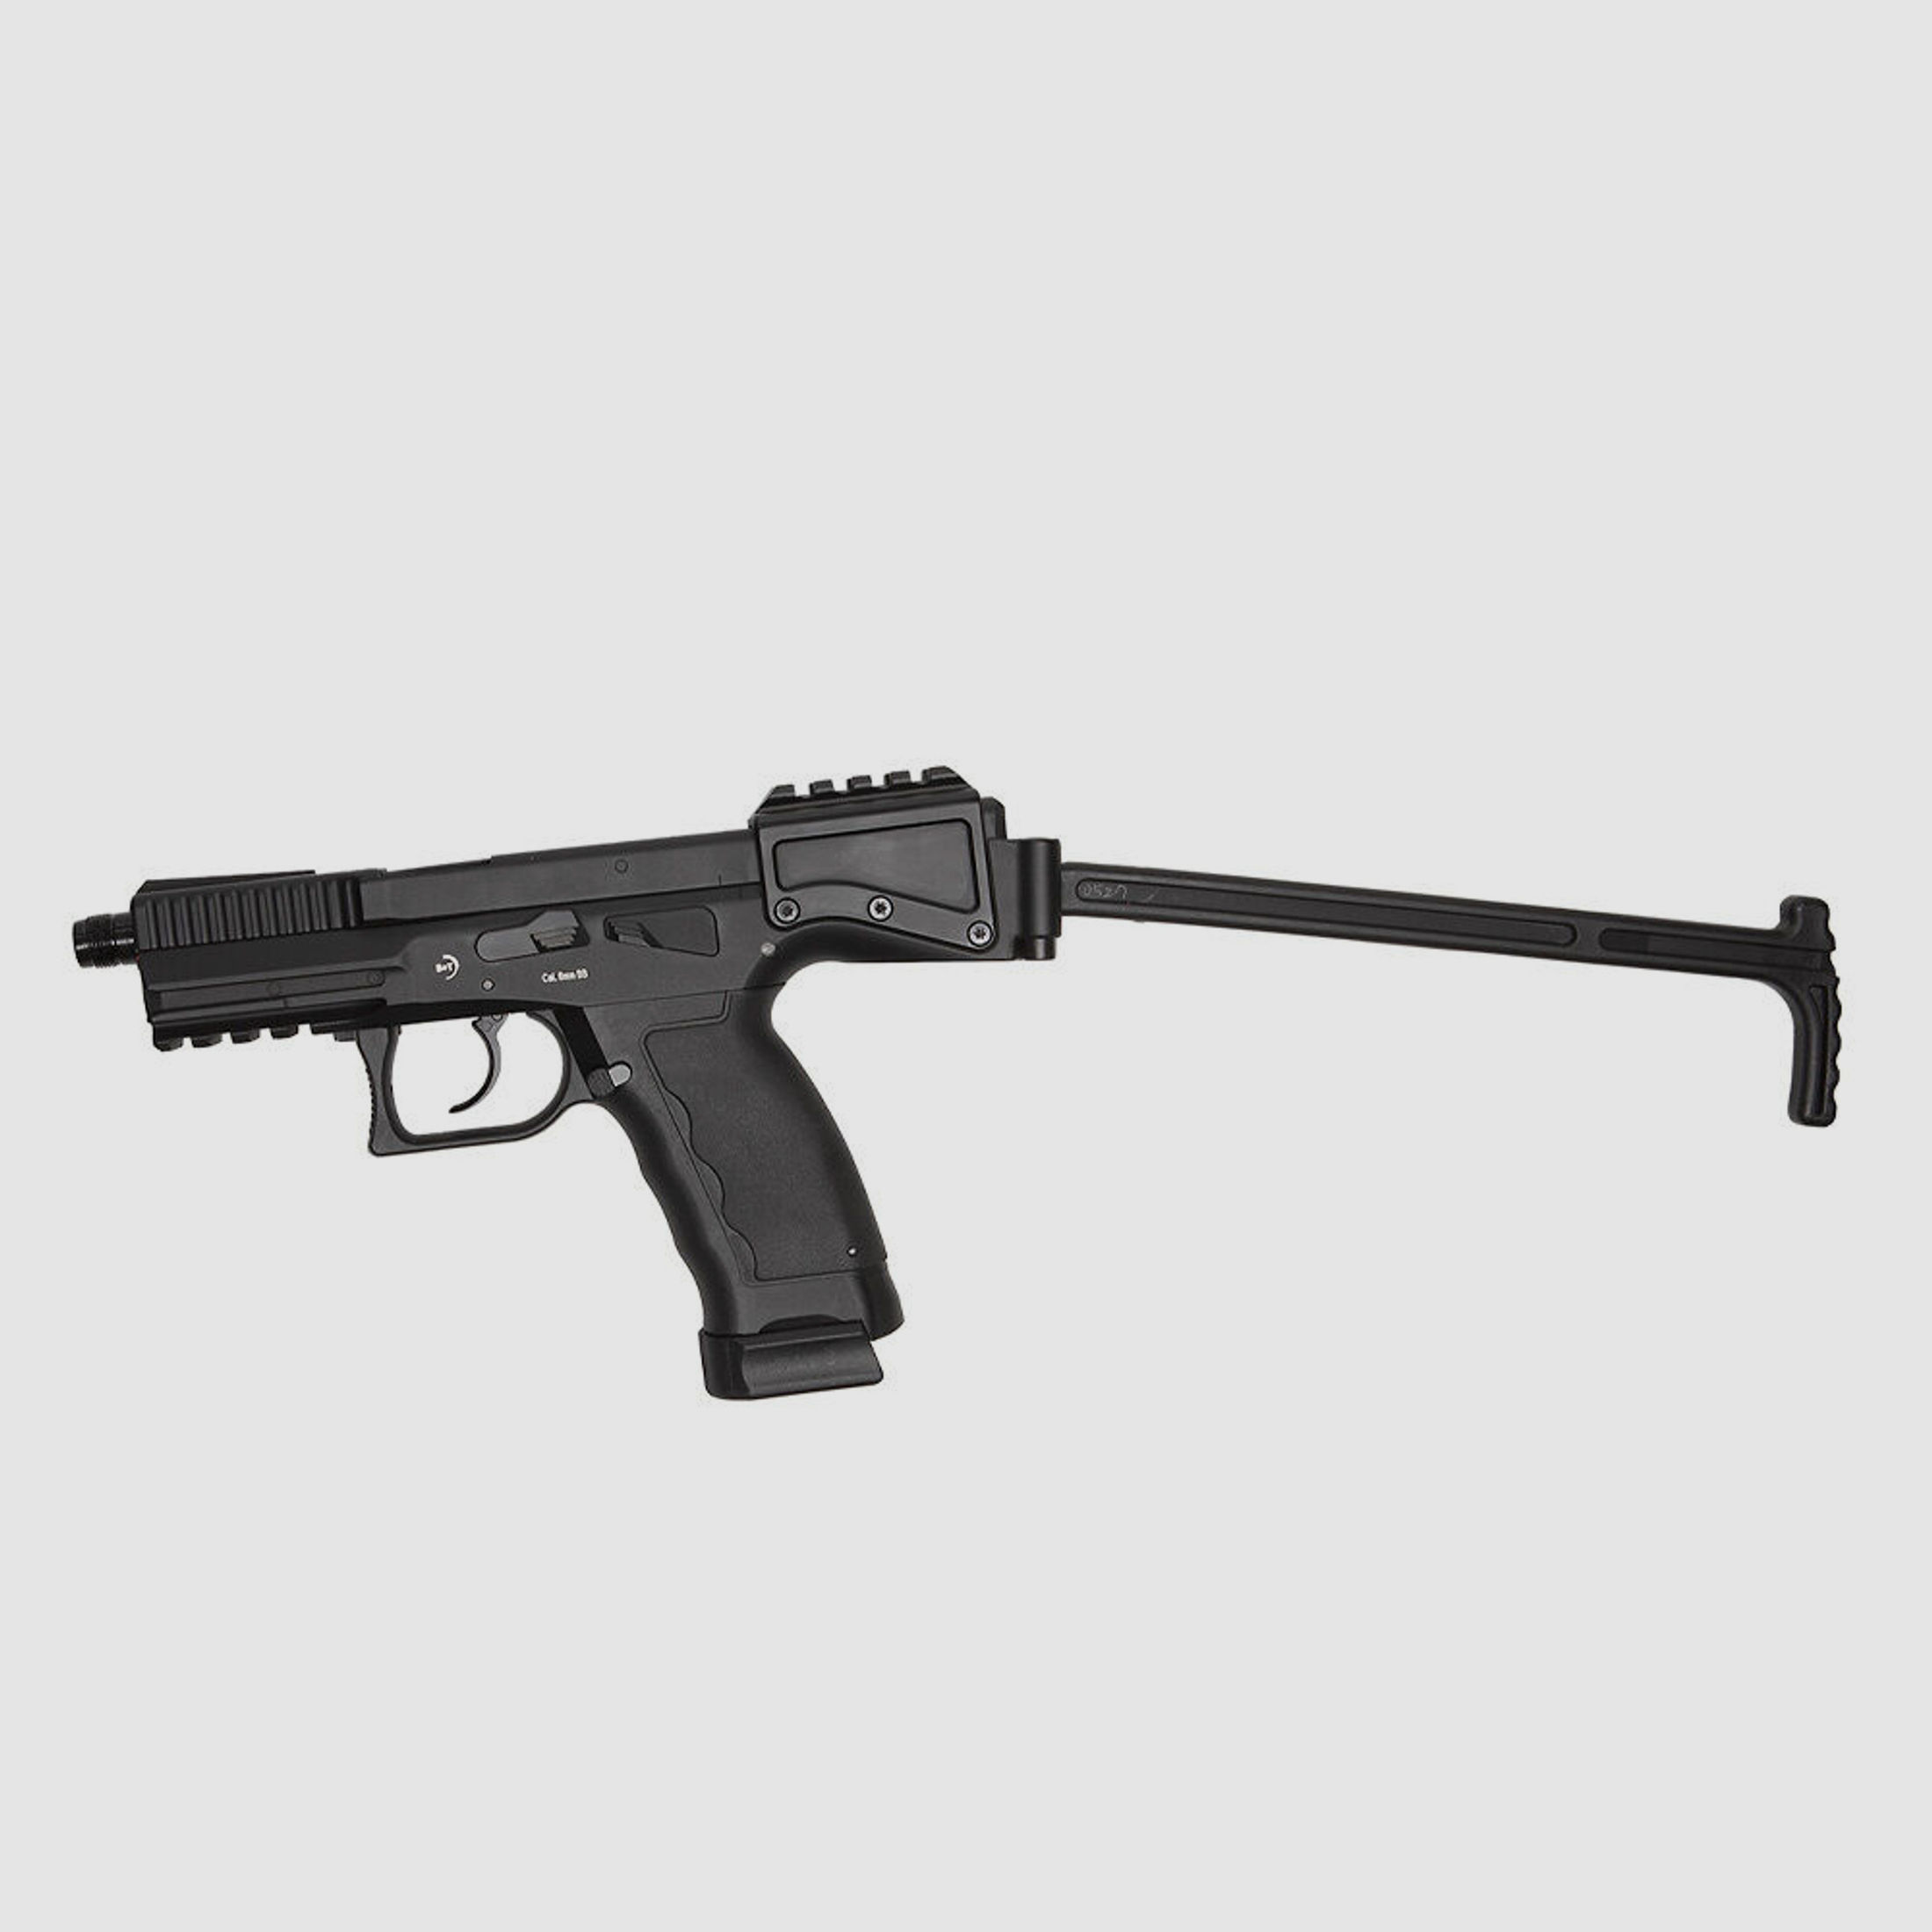 ASG	 B&T USW A1 Airsoft Co2 6 mm BB Blowback Schwarz